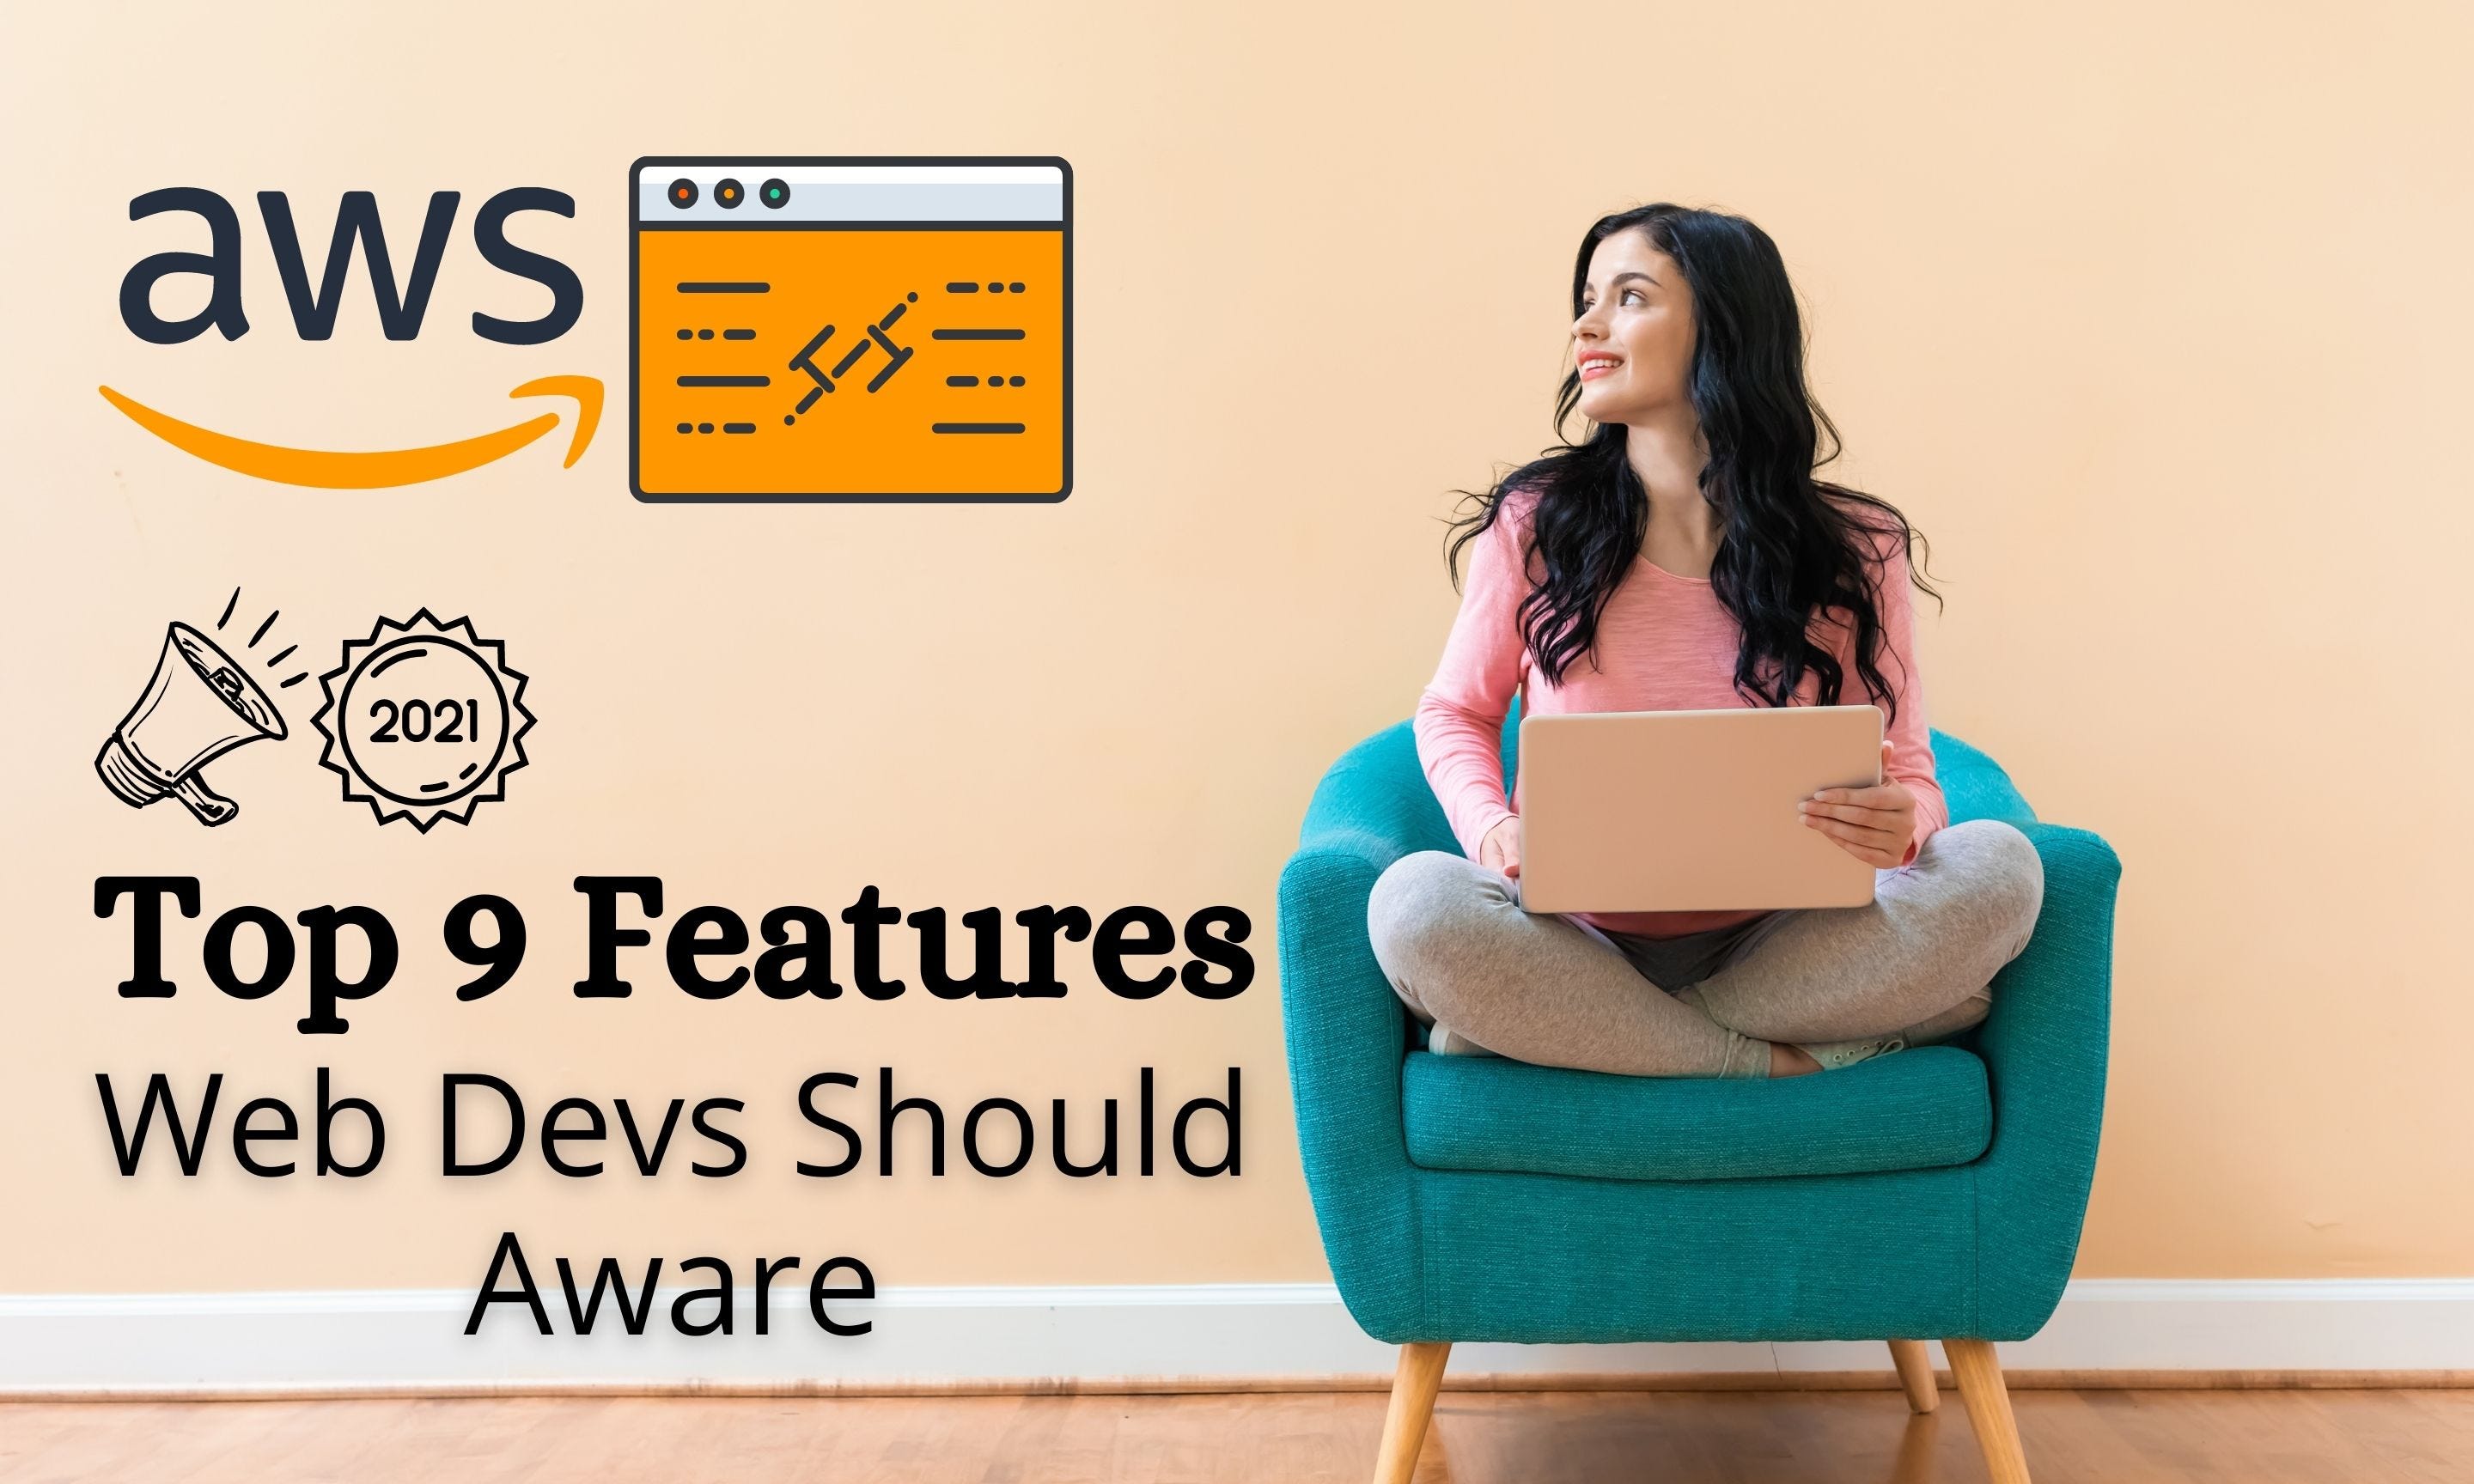 Top 9 AWS Features for Web Developers